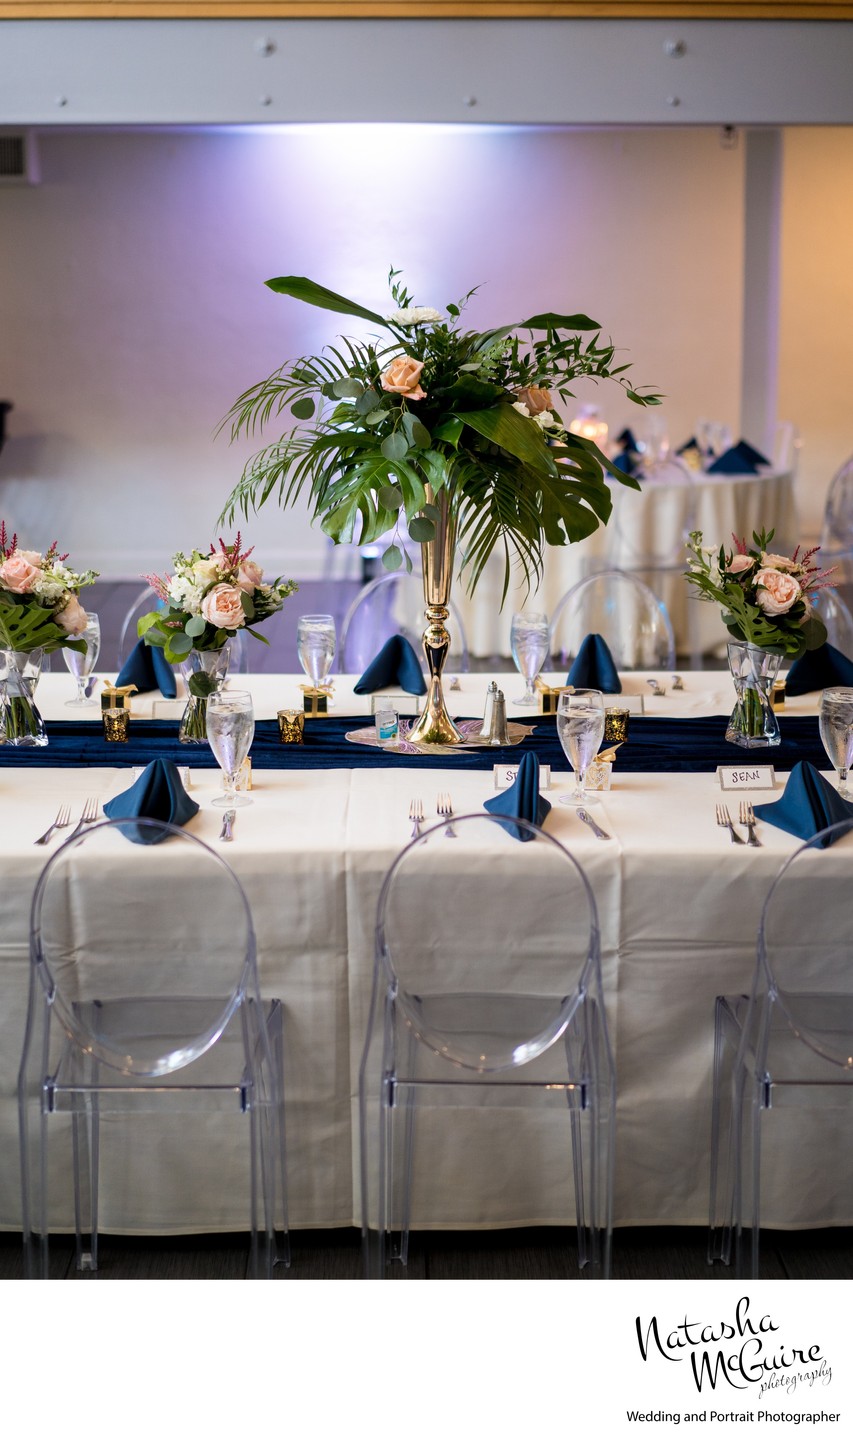 Leshers flowers at St Louis wedding at Majorette